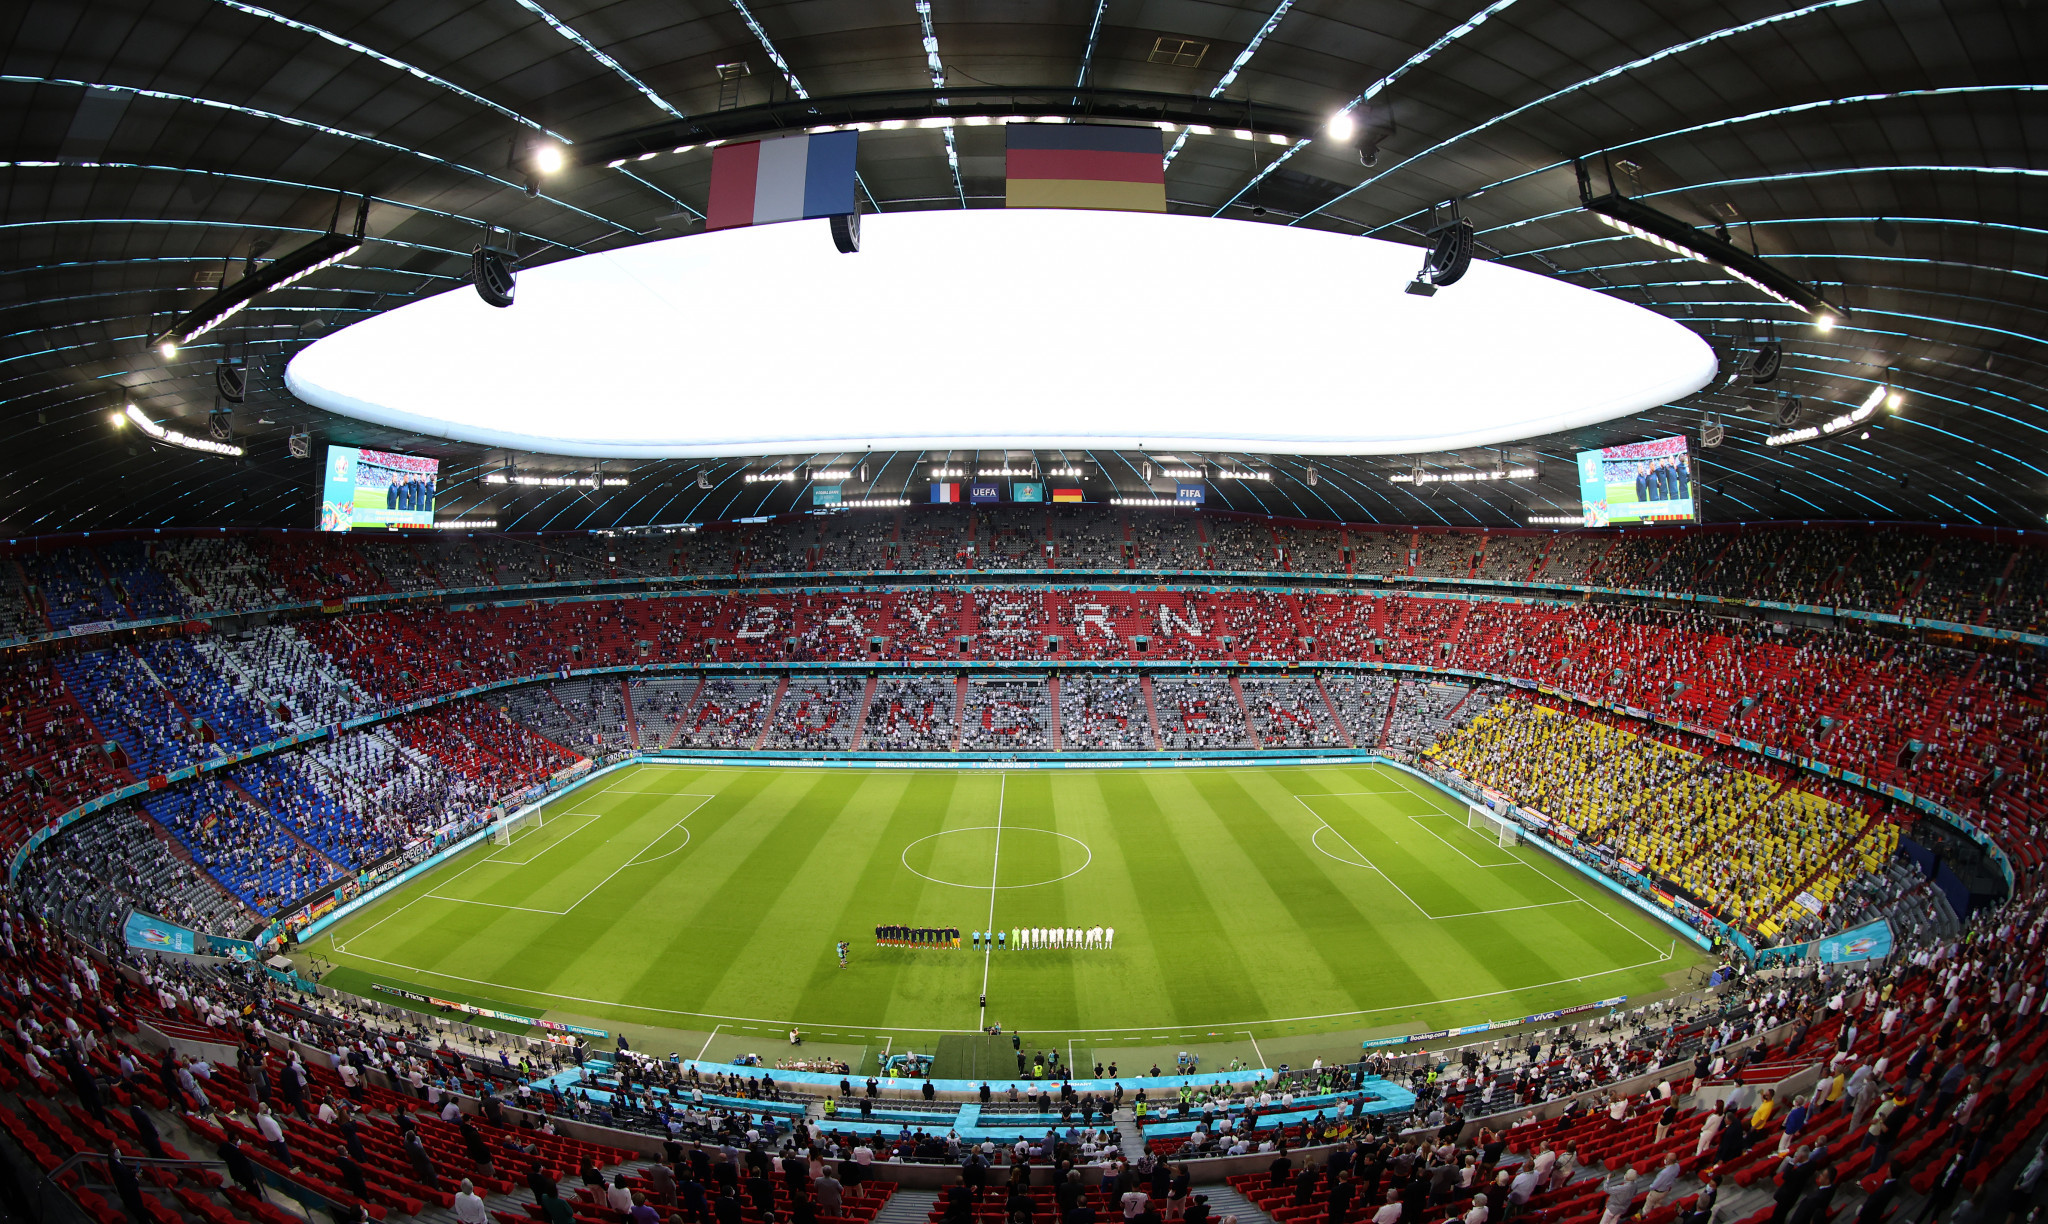 Munich's Euro 2020 venue the Fussball Arena is set to stage the opening match of the next edition of the men's Championship ©Getty Images